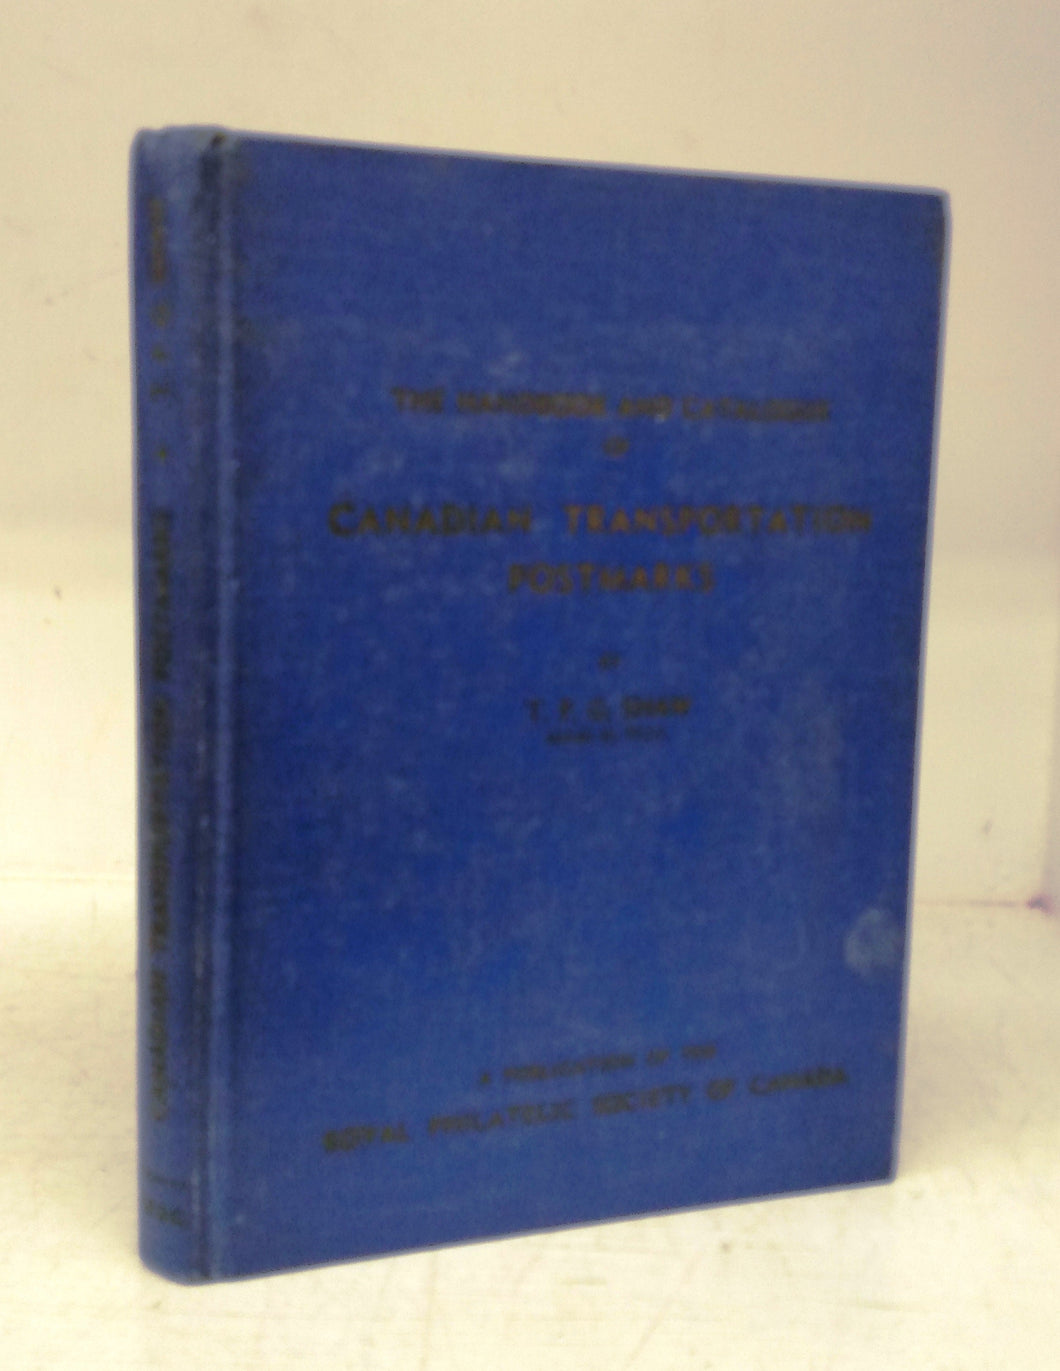 The Handbook and Cataogue of Canadian Transportation Postmarks